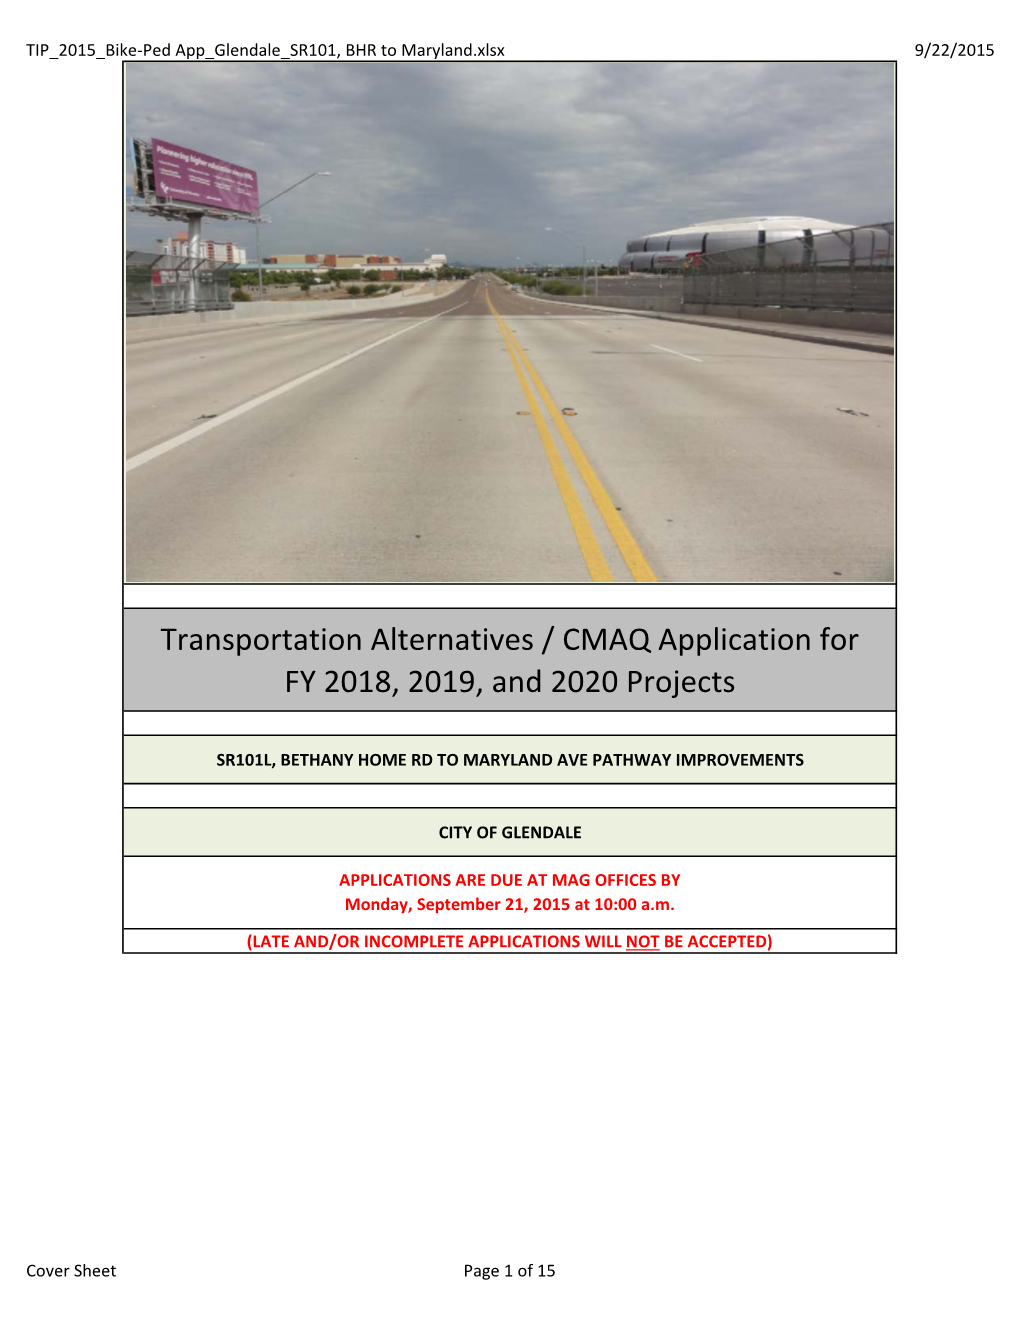 Transportation Alternatives / CMAQ Application for FY 2018, 2019, and 2020 Projects